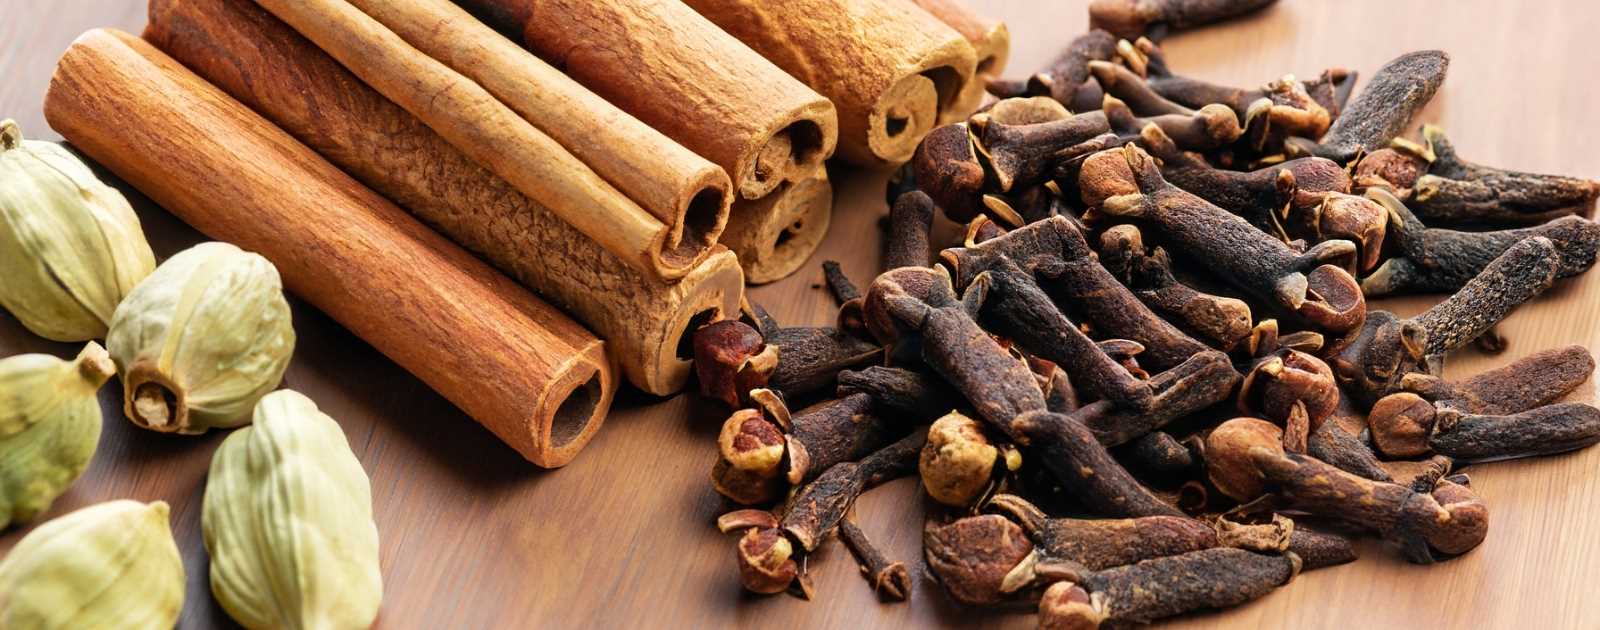 Benefits Of Cloves To The Vagina- Does Drinking Cloves Water Tighten the Vagina